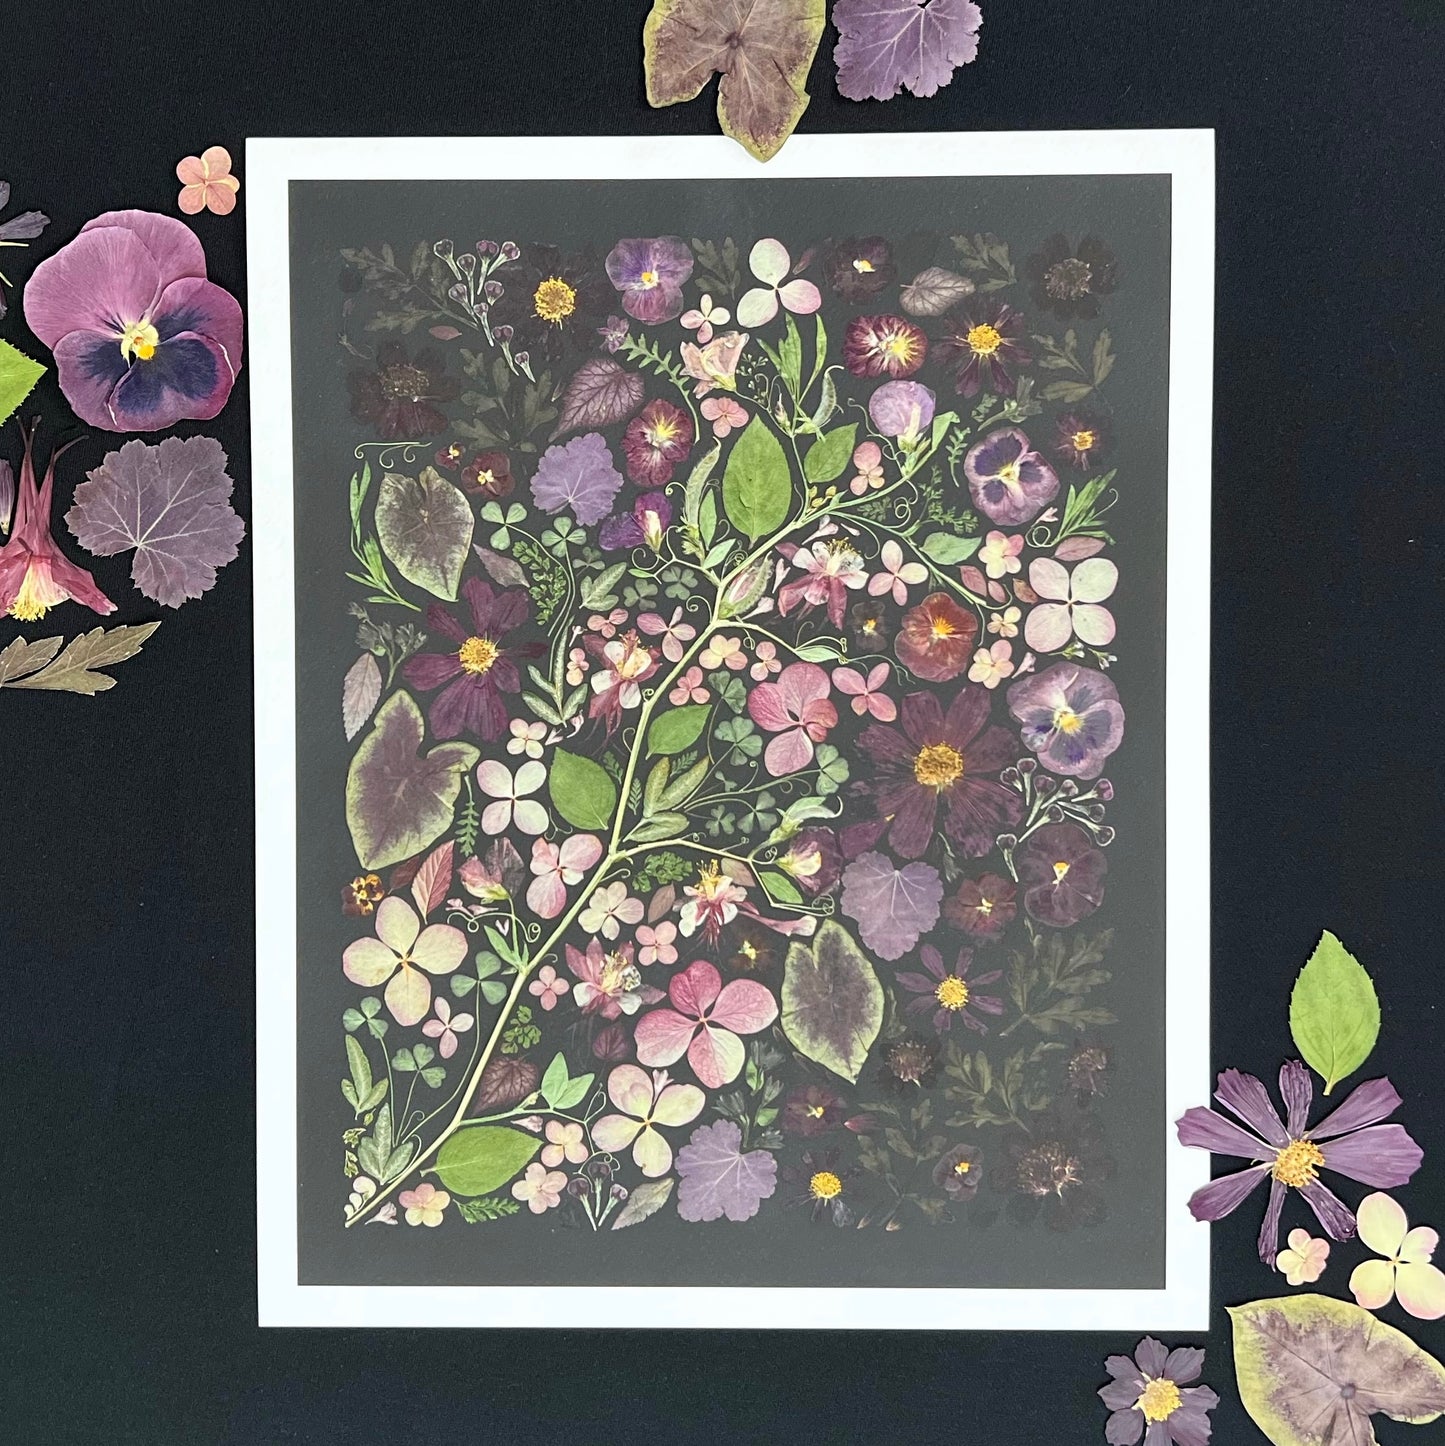 A black picture with a white trim is sitting on top of black fabric. The art has pressed flowers in a variety of colors appearing to come from a vine. There are several loose pressed flowers laying on the fabric and a few are touching the white border.